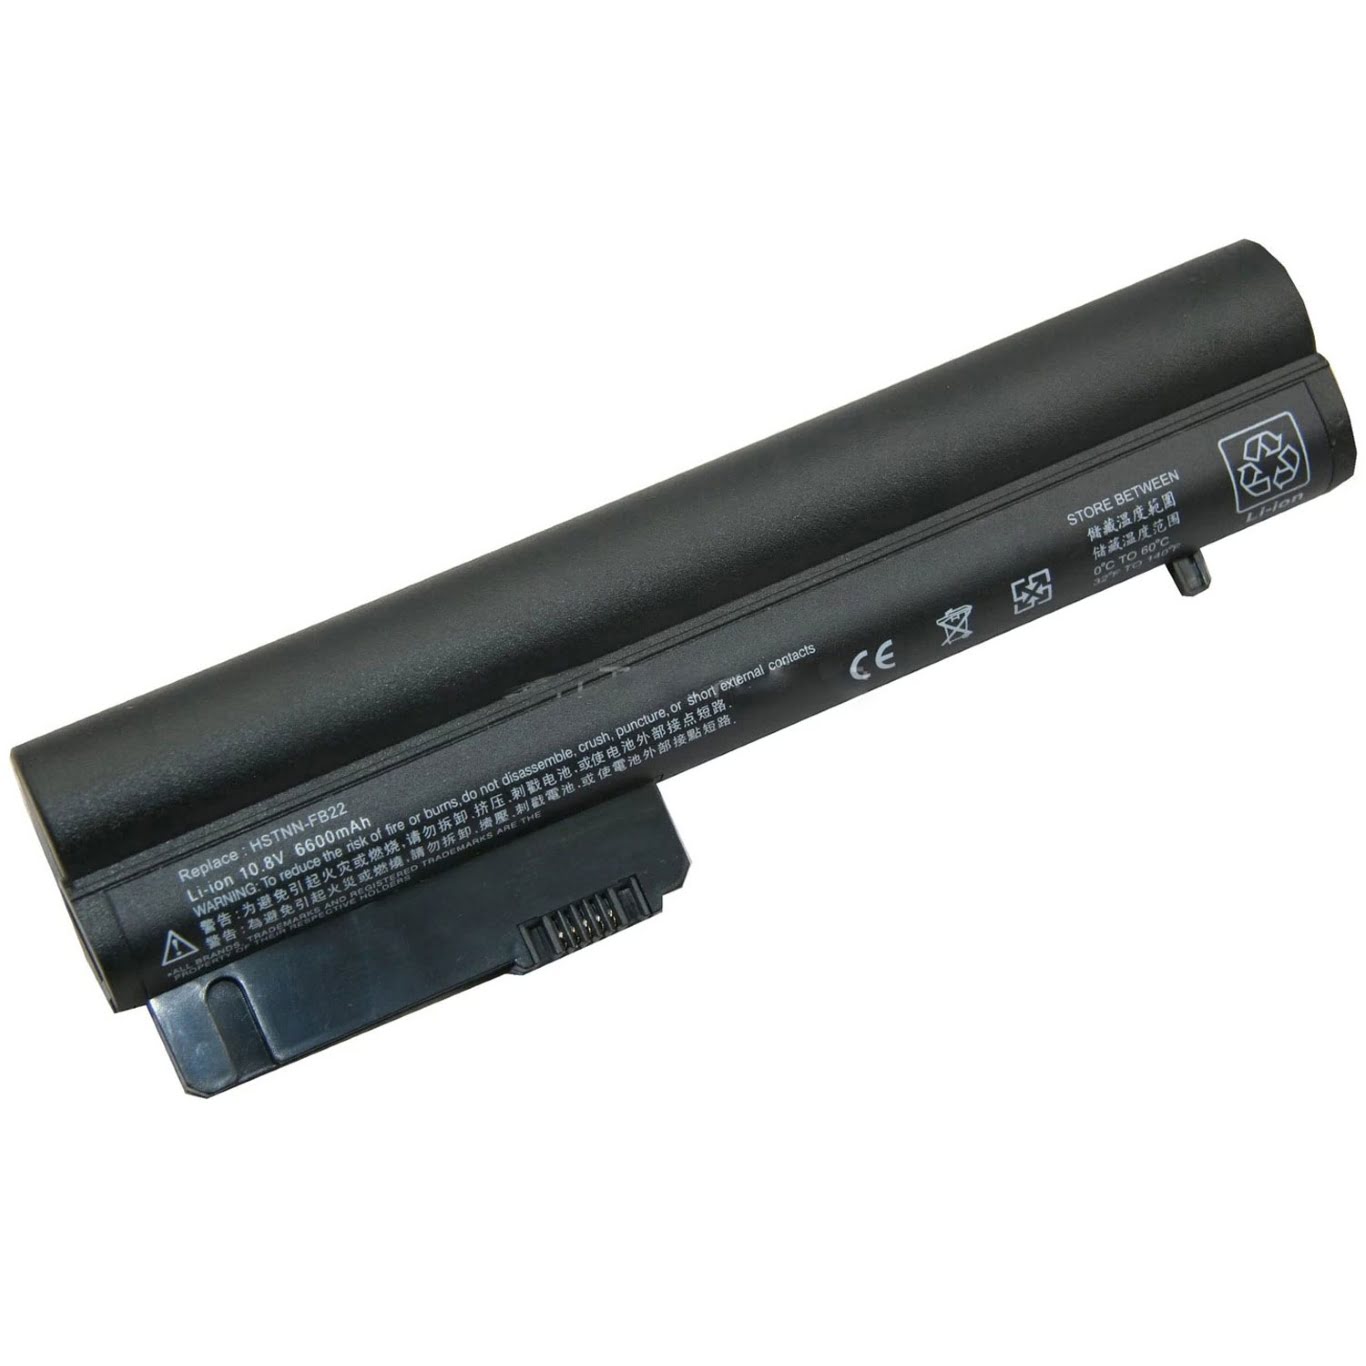 404866-622, 404866-642 replacement Laptop Battery for HP 2510P, 2533t Mobile Thin Client, 9 cells, 10.8V, 6600mAh